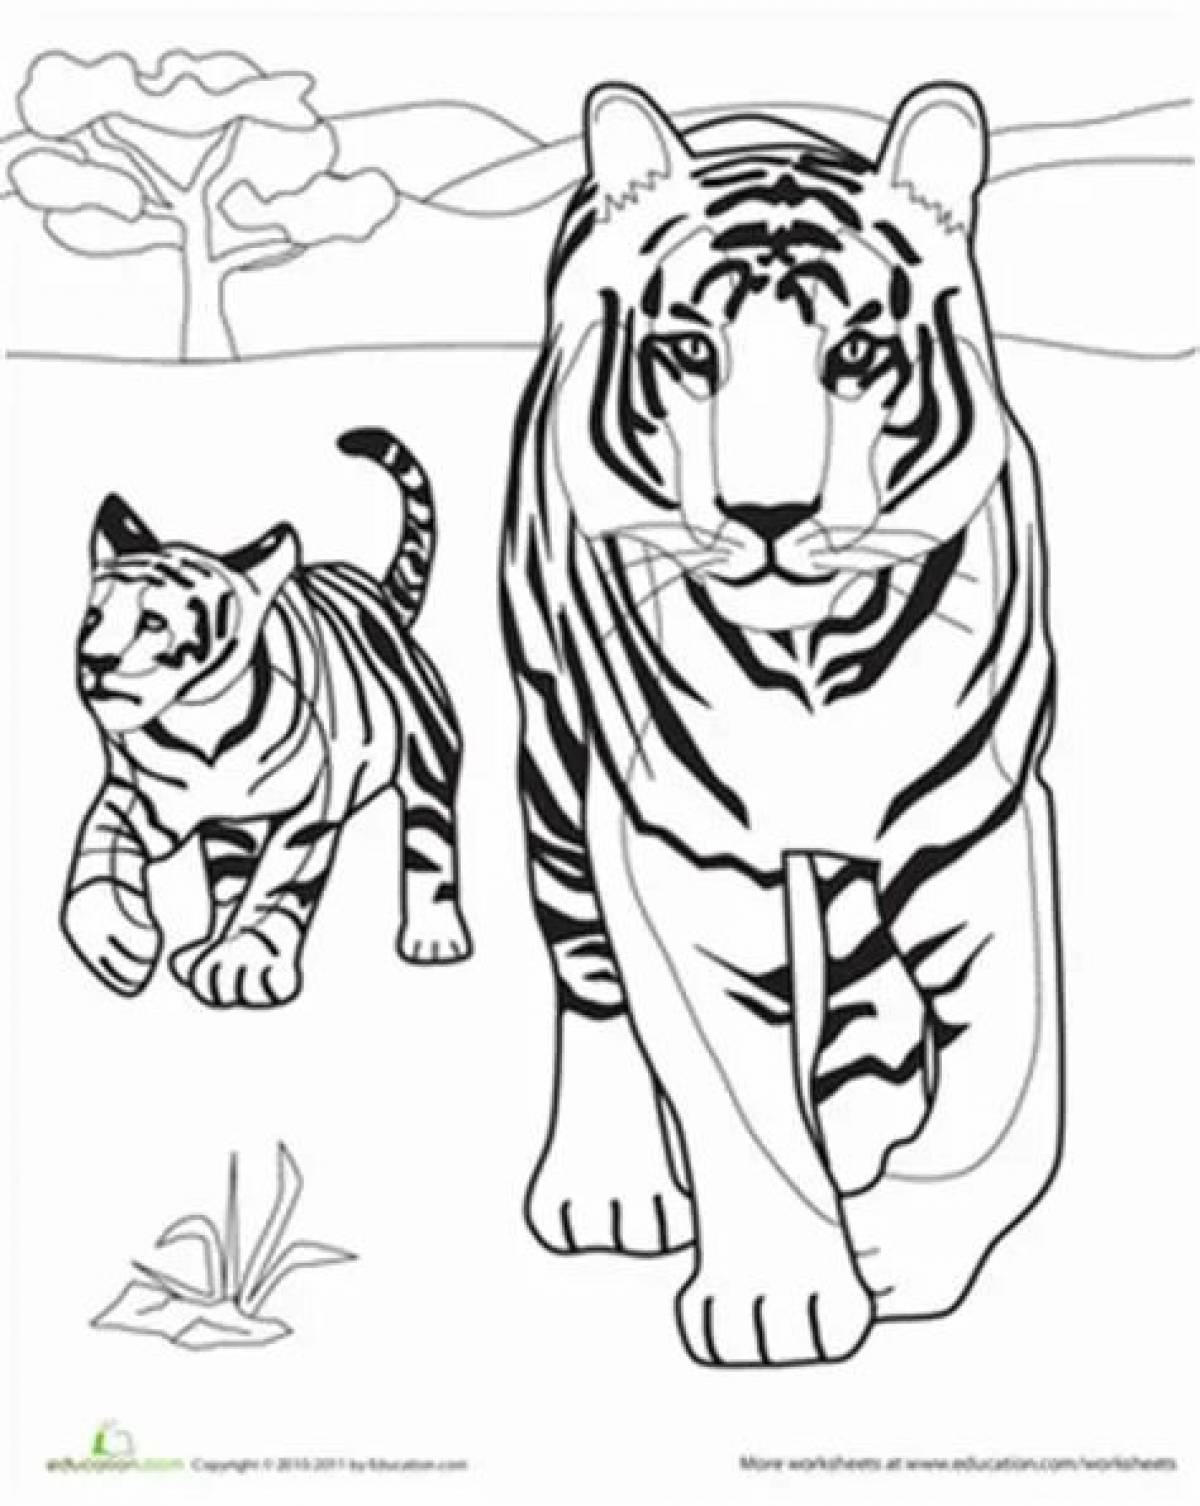 Coloring book magnanimous white tiger